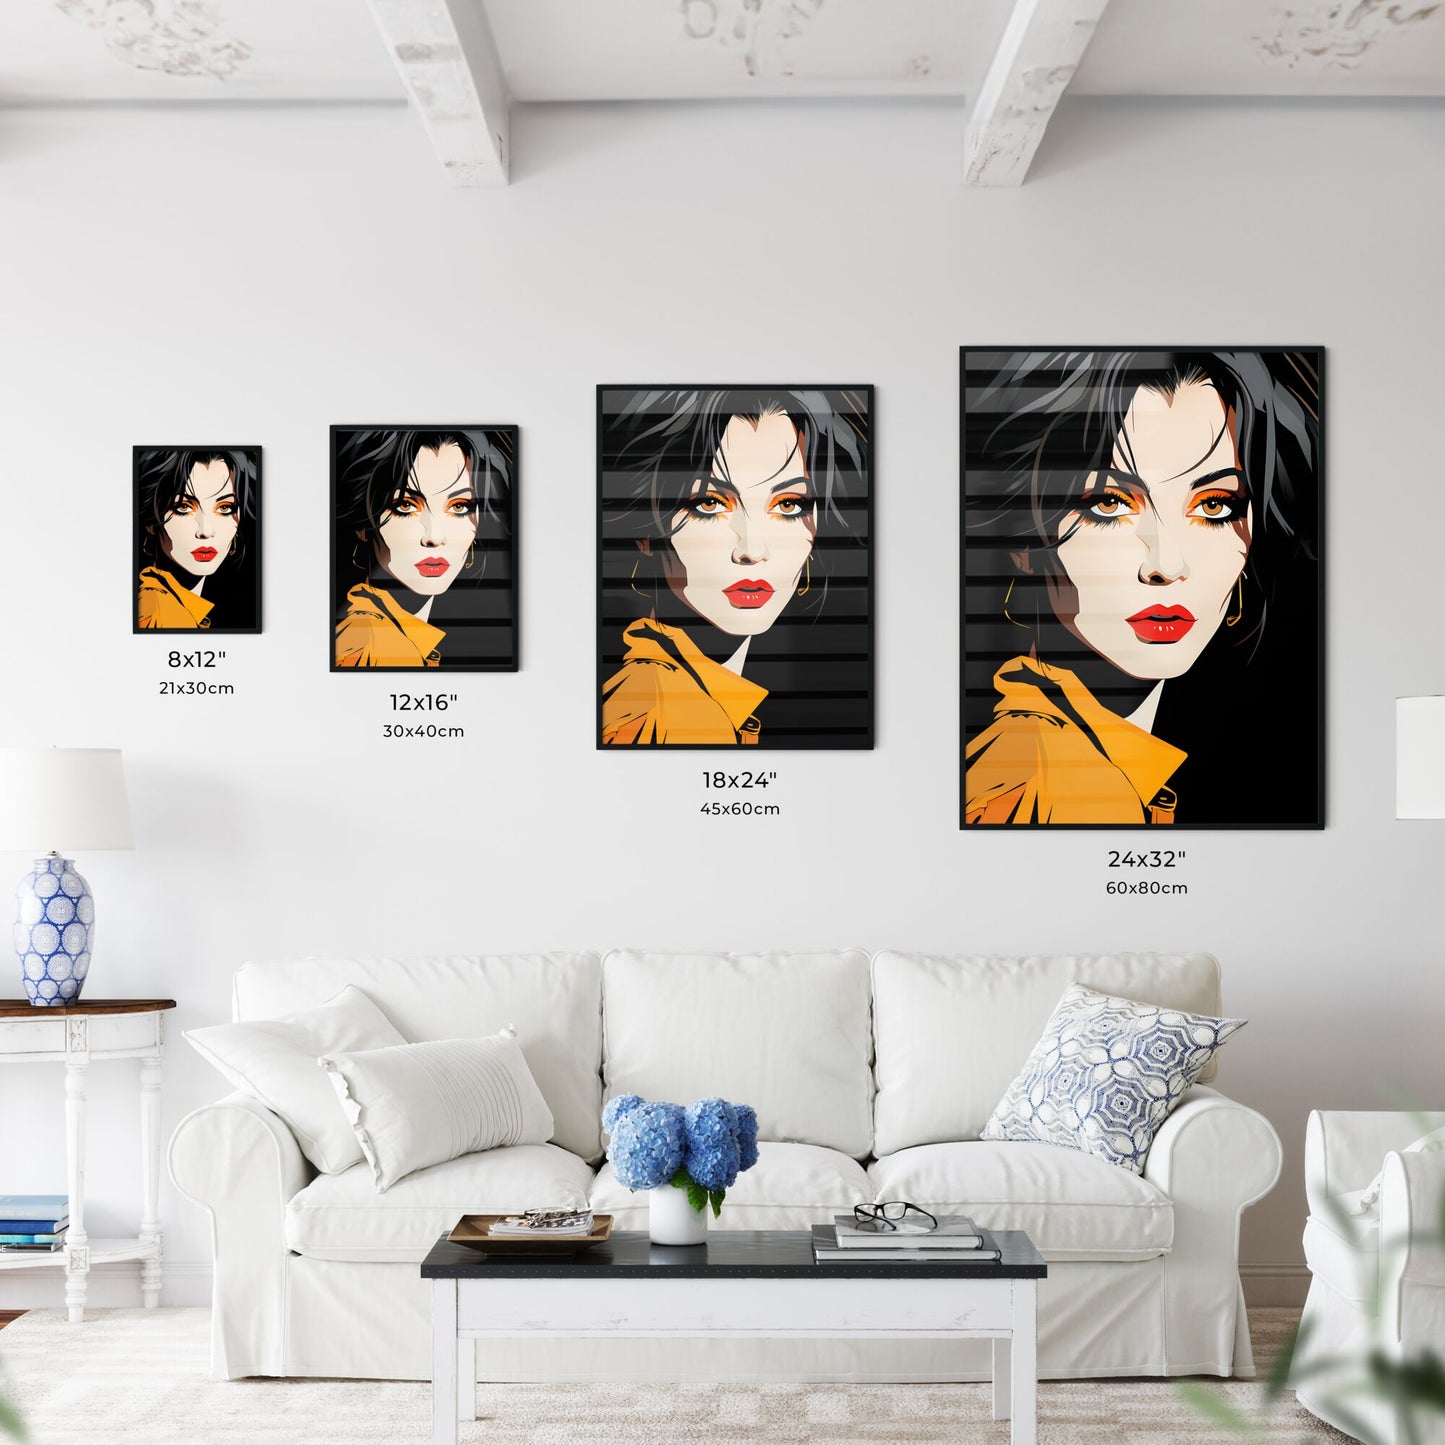 A Poster of Illustration - A Woman With Black Hair And Orange Makeup Default Title